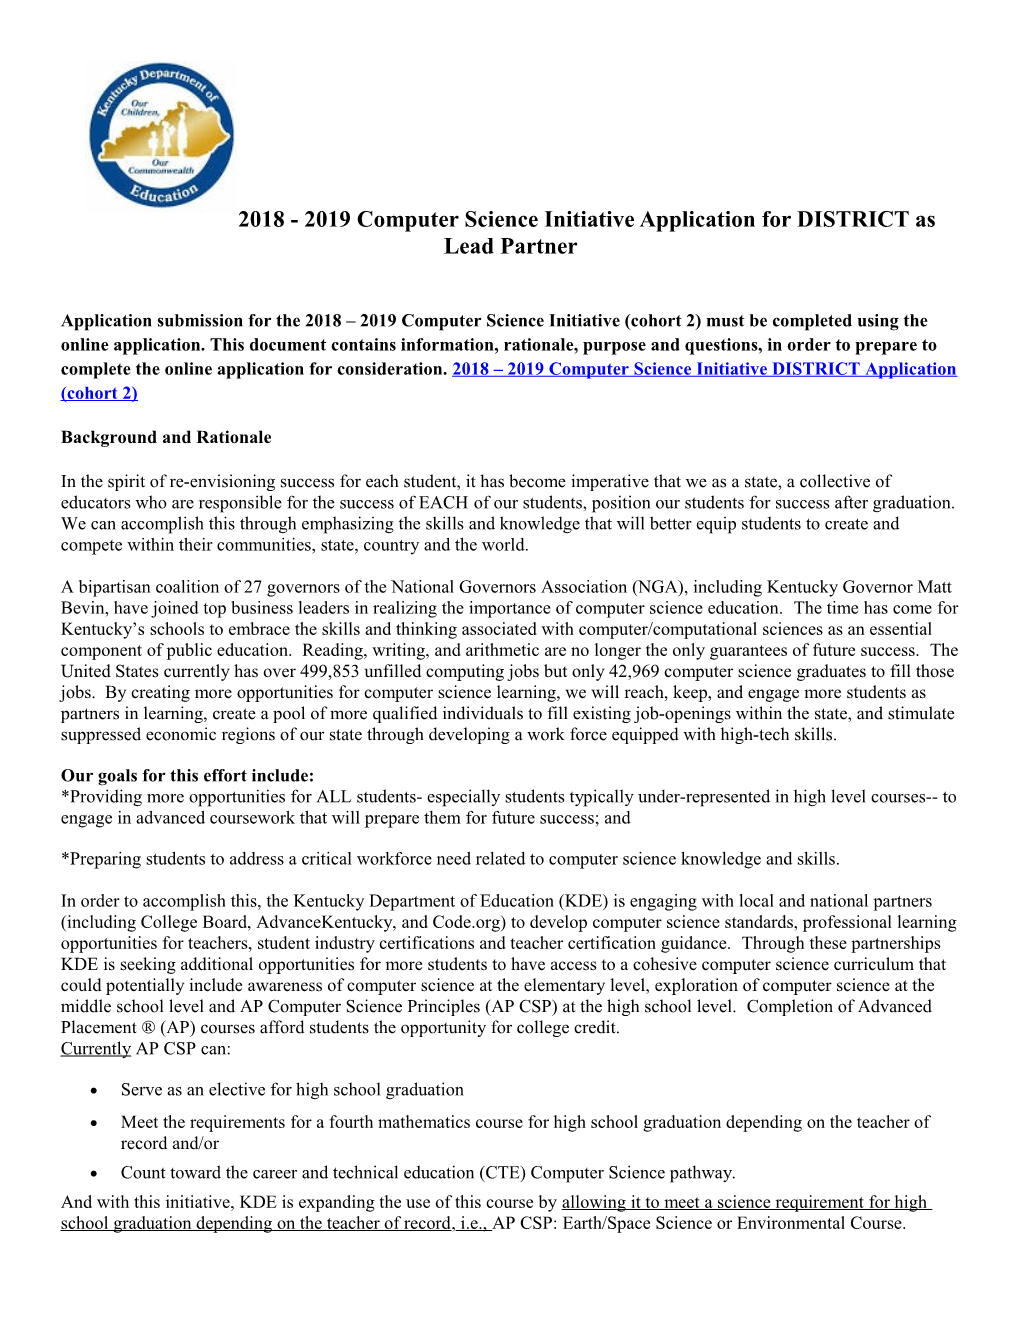 Application Submission for the 2018 2019 Computer Science Initiative (Cohort 2) Must Be